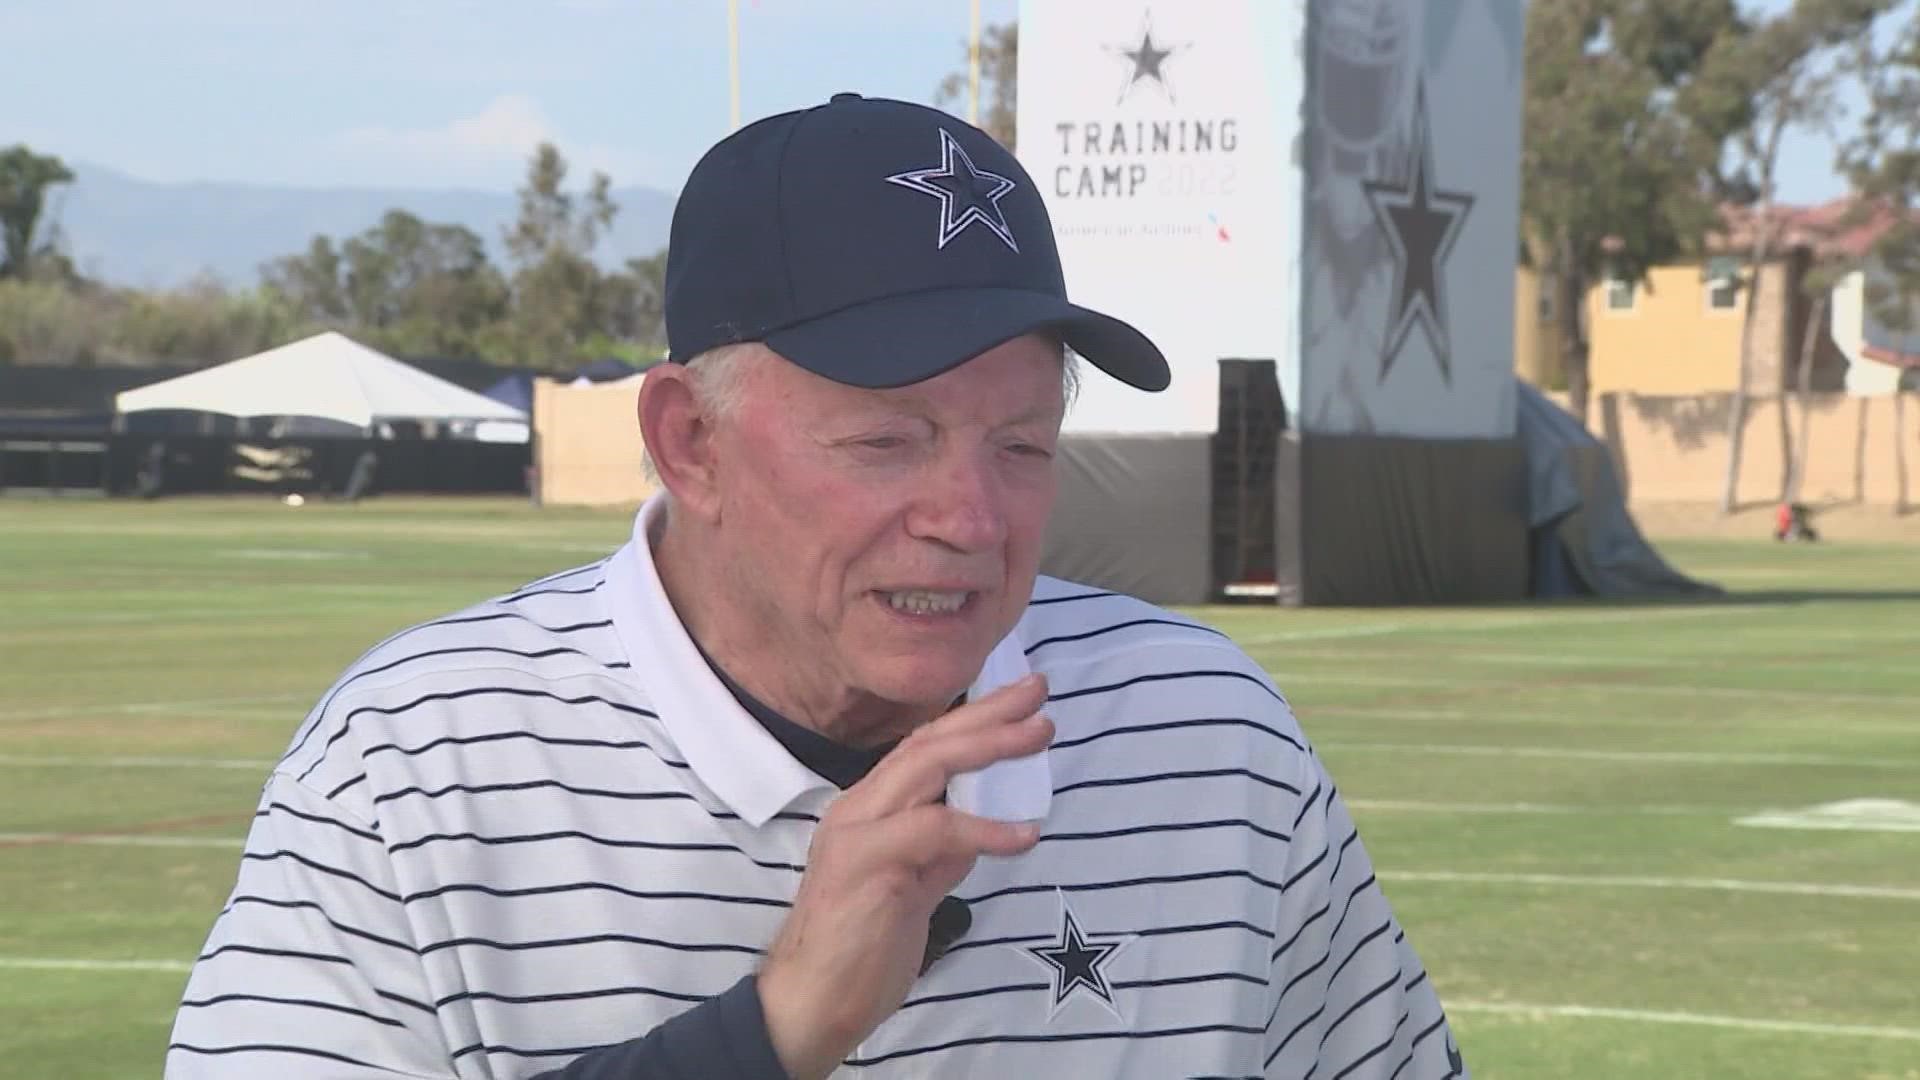 The pressure is on the Cowboys owner to win some games this season as he approaches his 80th birthday.